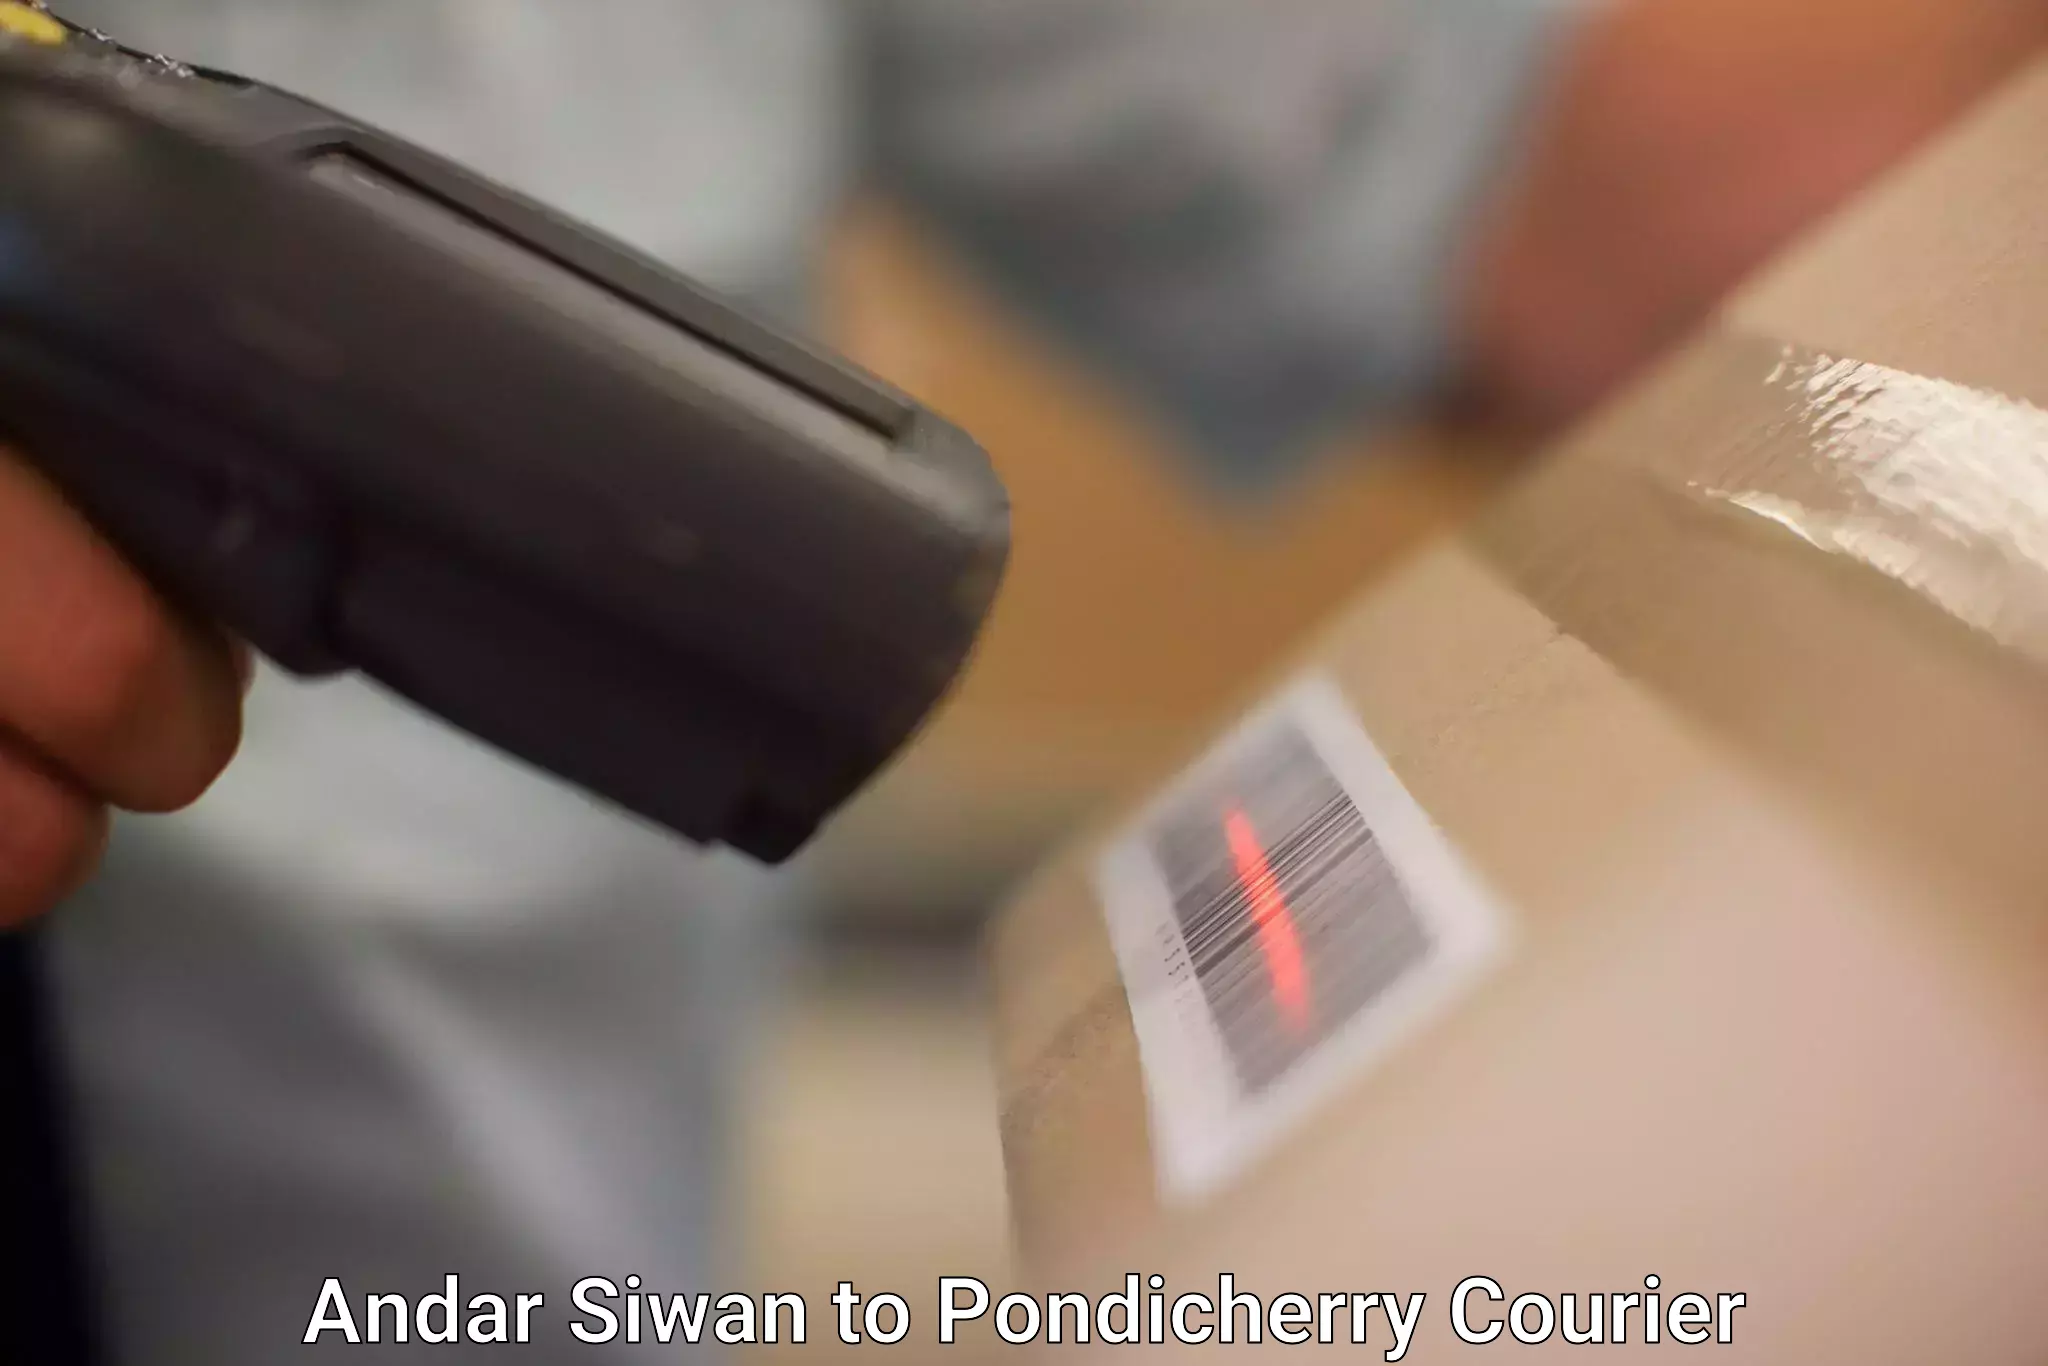 International courier networks Andar Siwan to Pondicherry